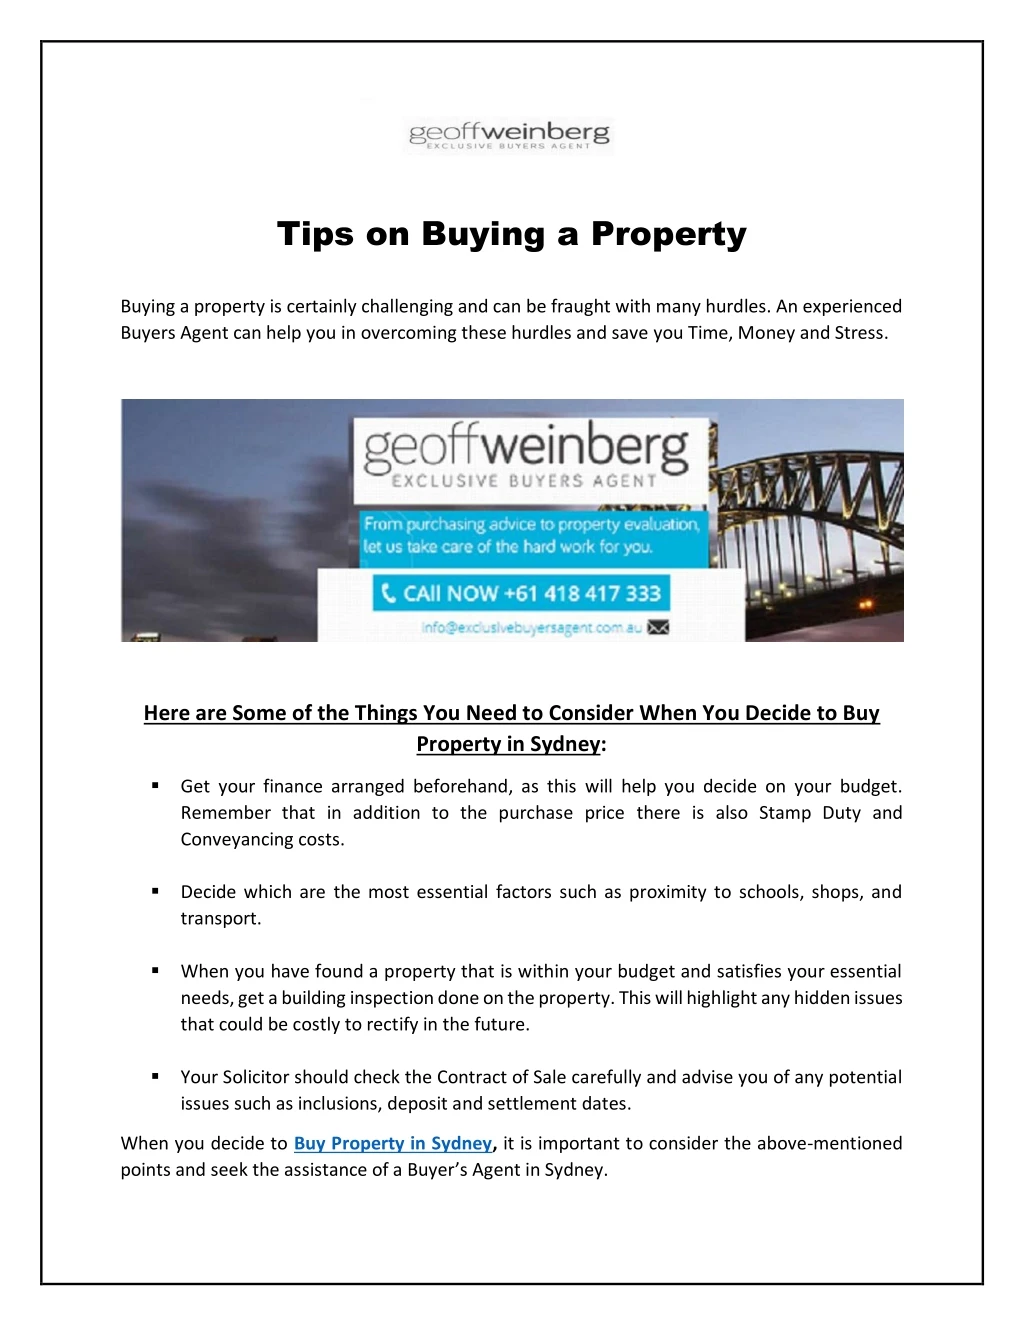 tips on buying a property